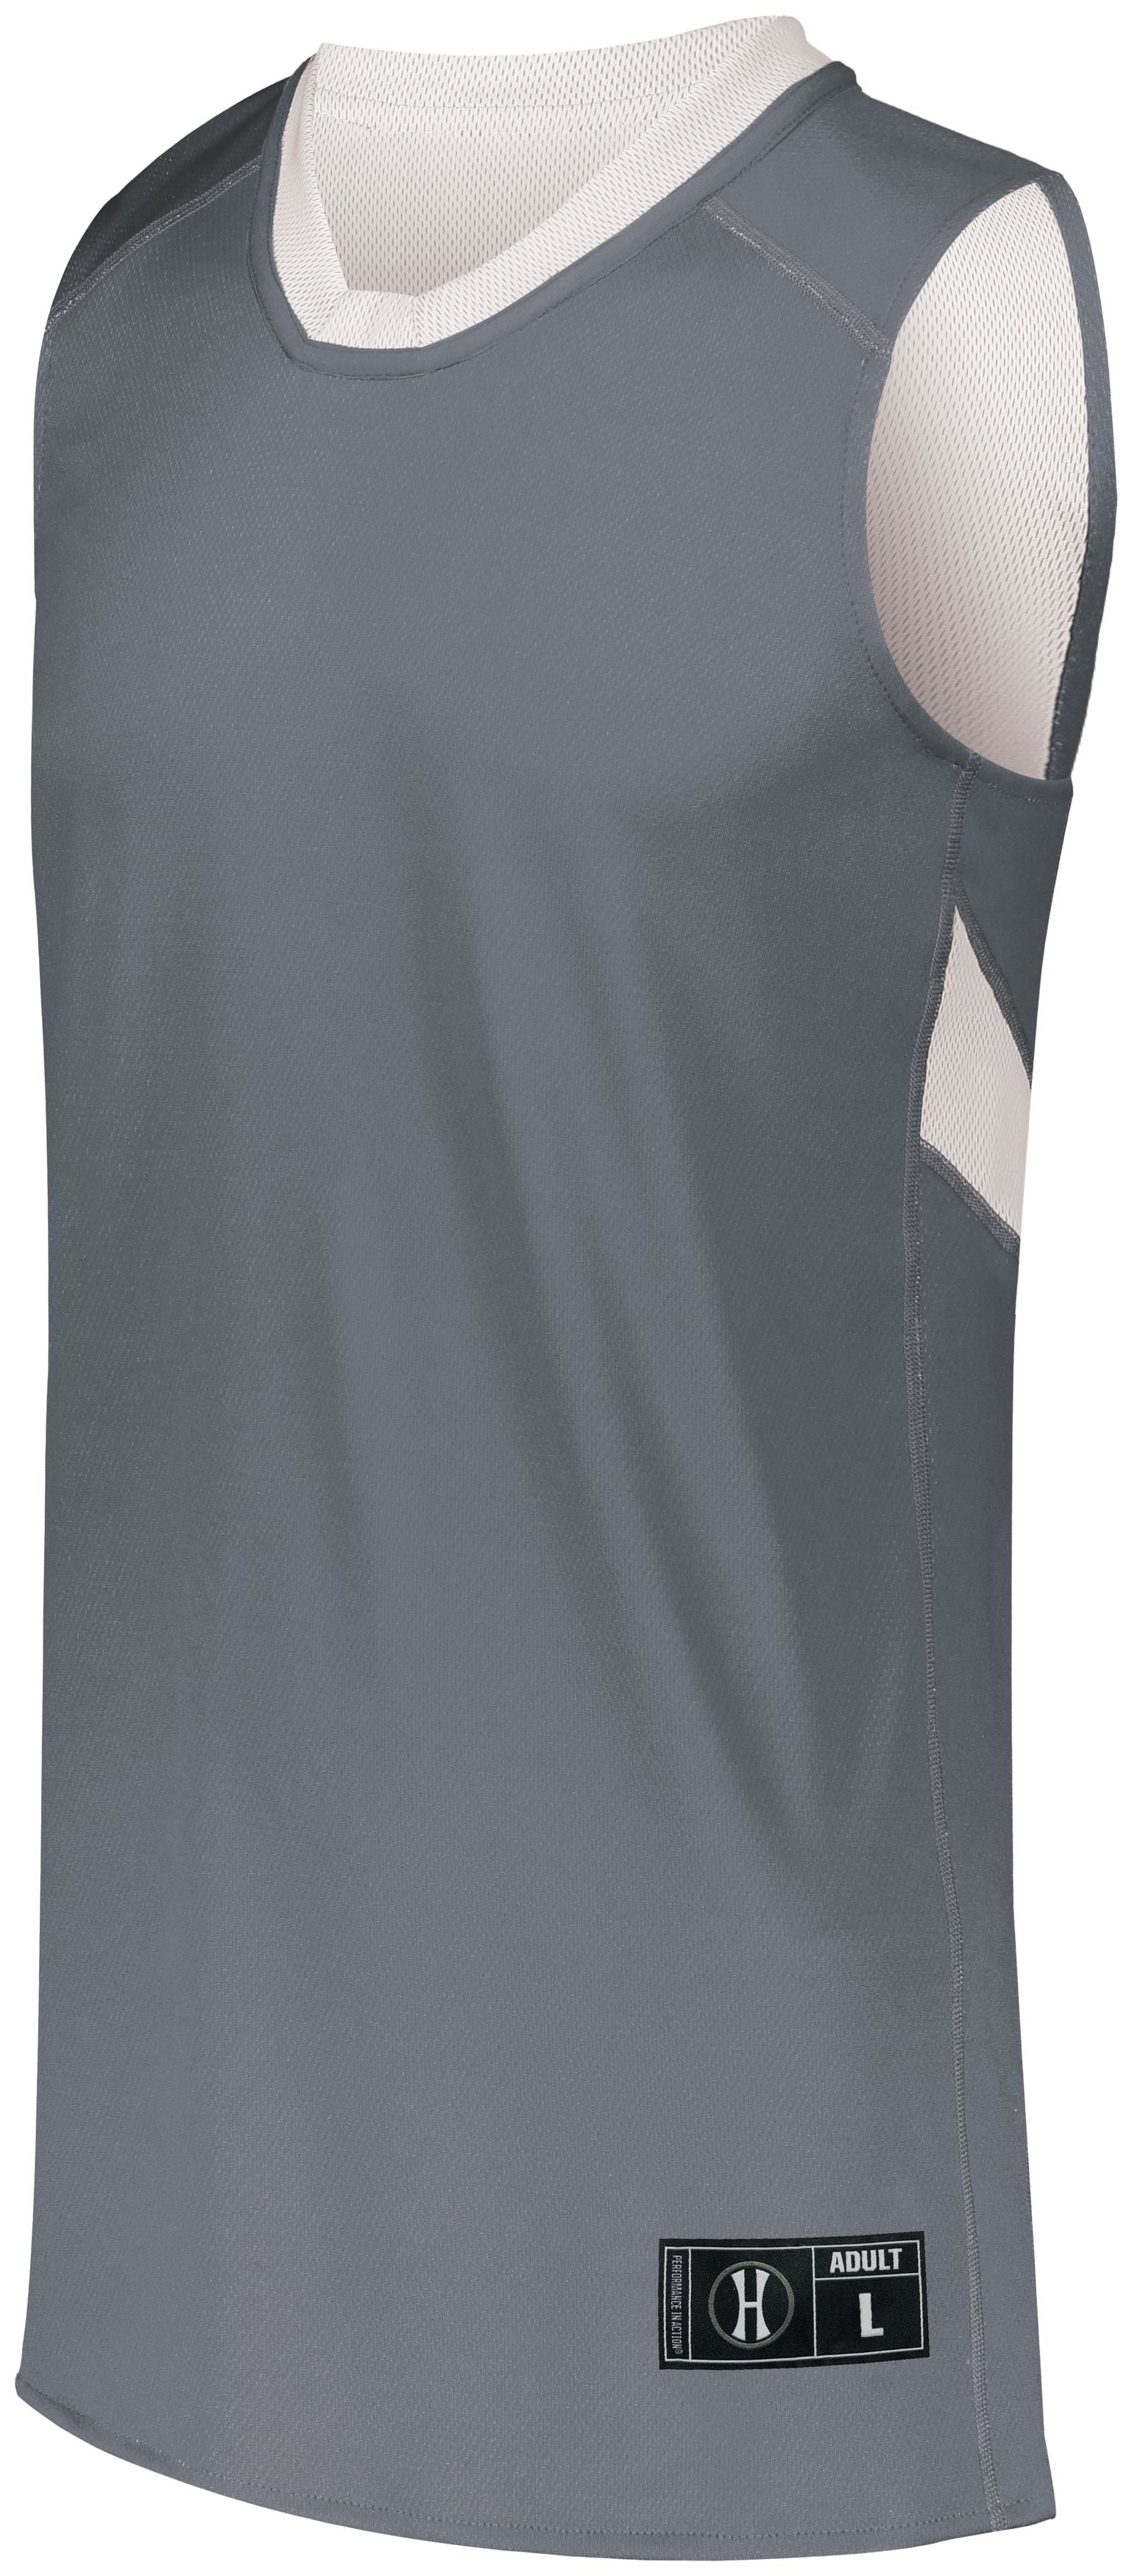 Holloway Youth Dual-Side Single Ply Basketball Jersey in Graphite/White  -Part of the Youth, Youth-Jersey, Basketball, Holloway, Shirts, All-Sports, All-Sports-1 product lines at KanaleyCreations.com